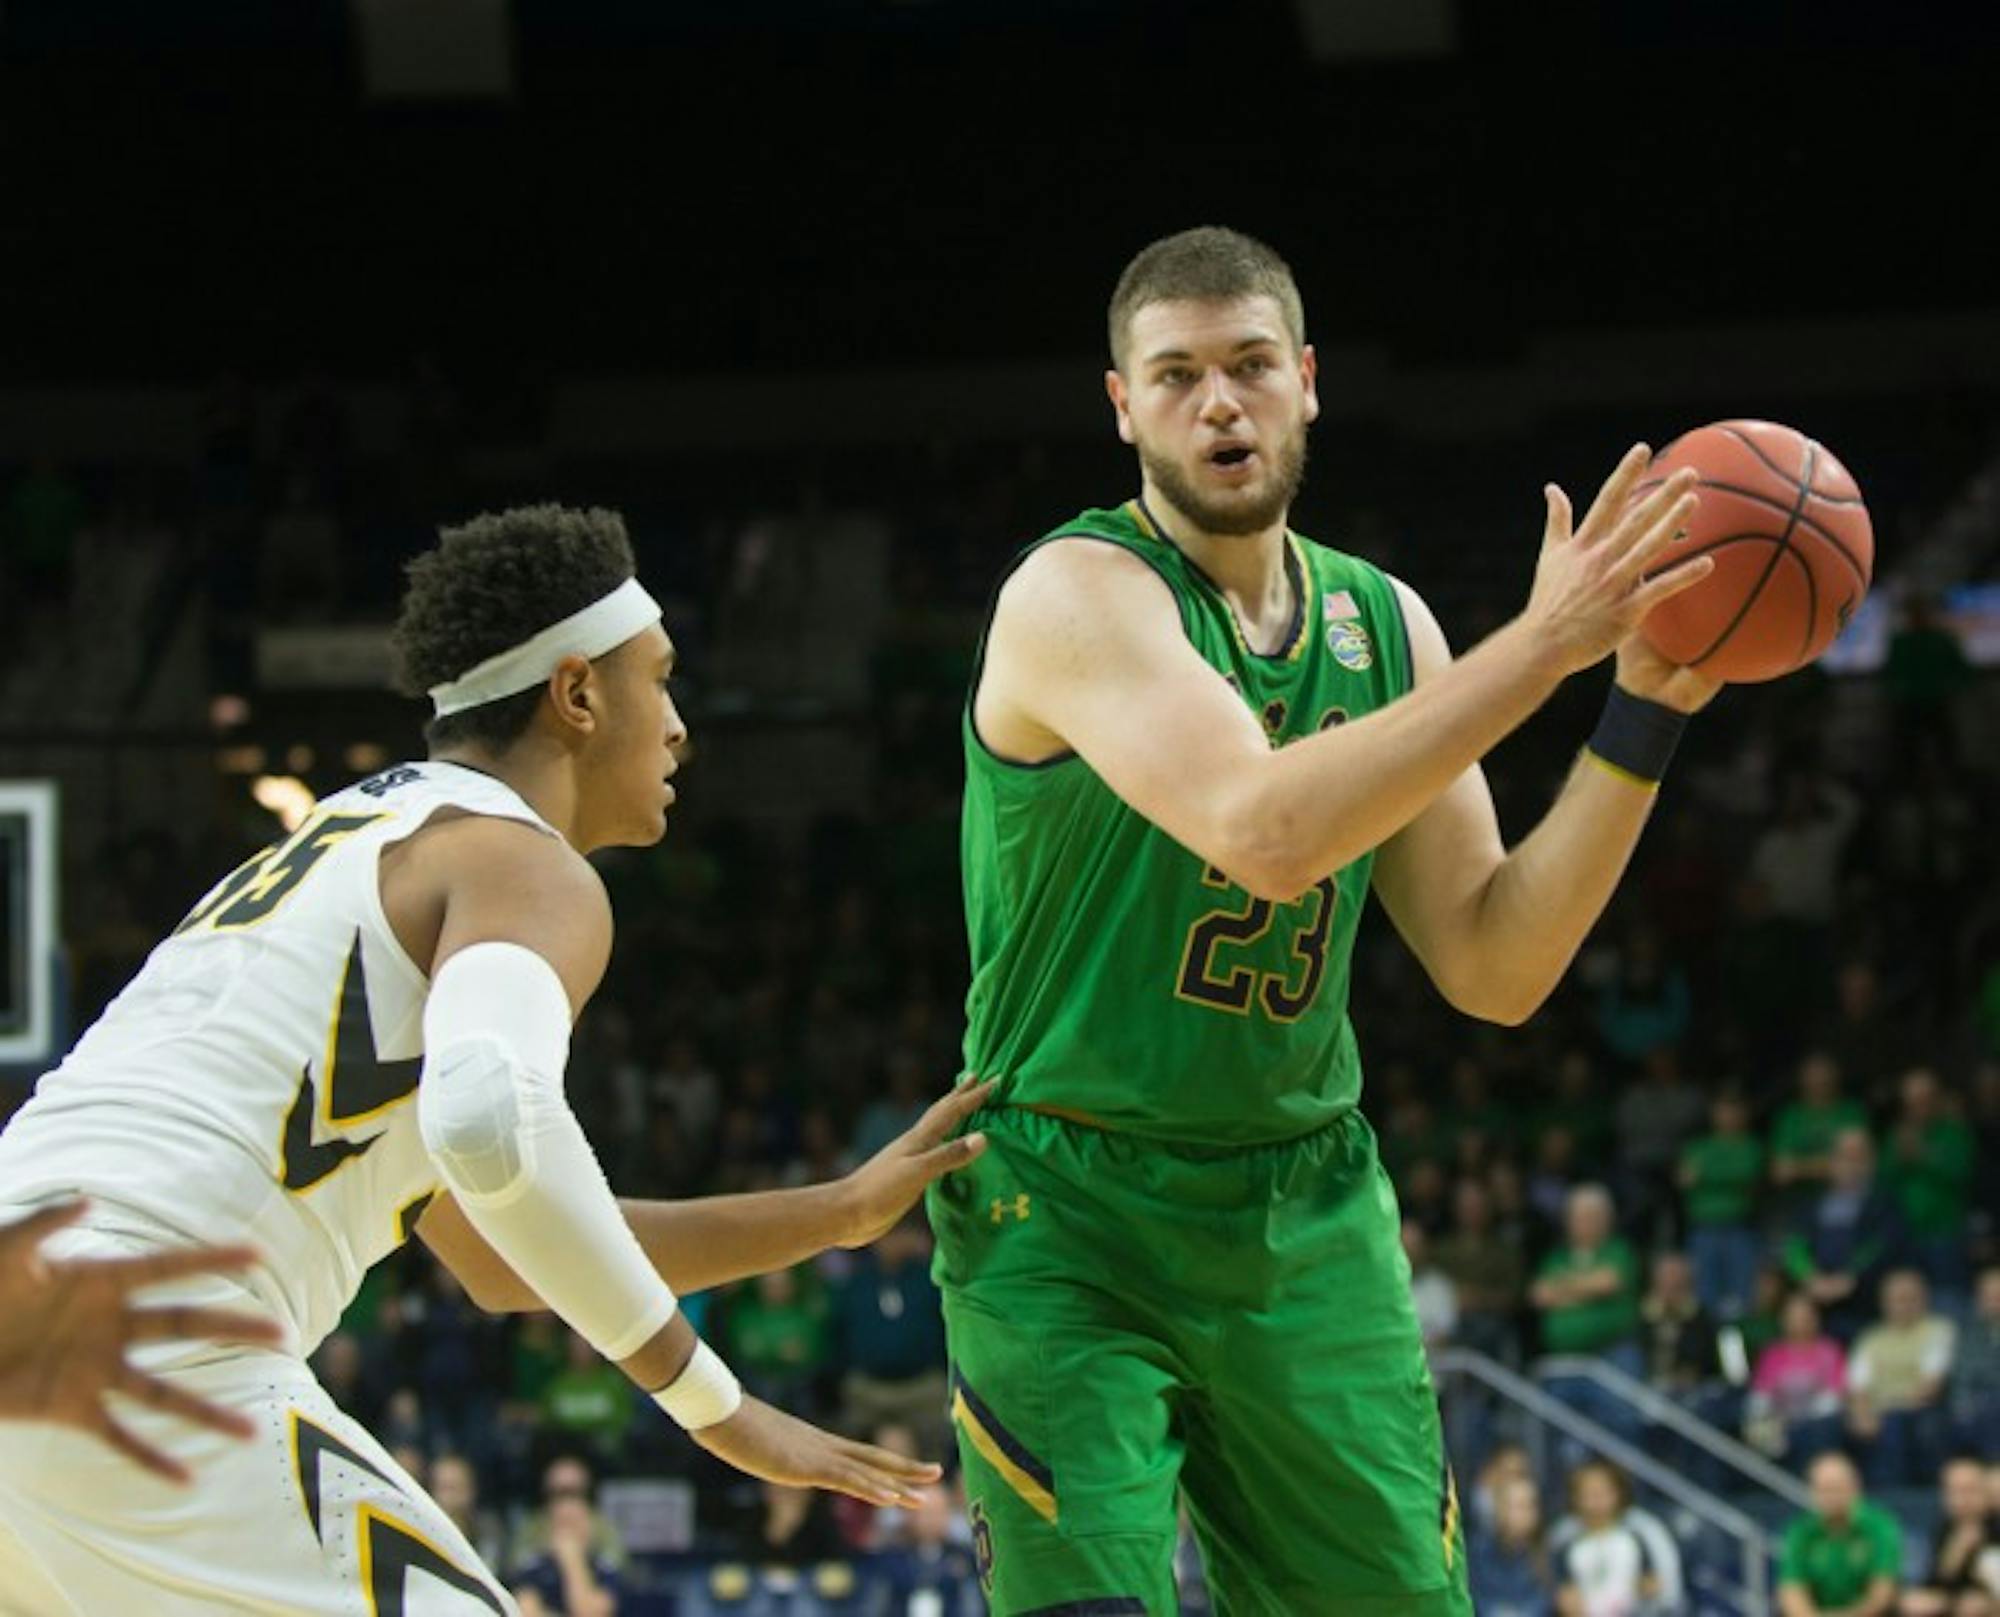 Irish junior forward Martinas Geben looks to pass during Notre Dame's 92-78 win over Iowa on Tuesday at Purcell Pavilion.